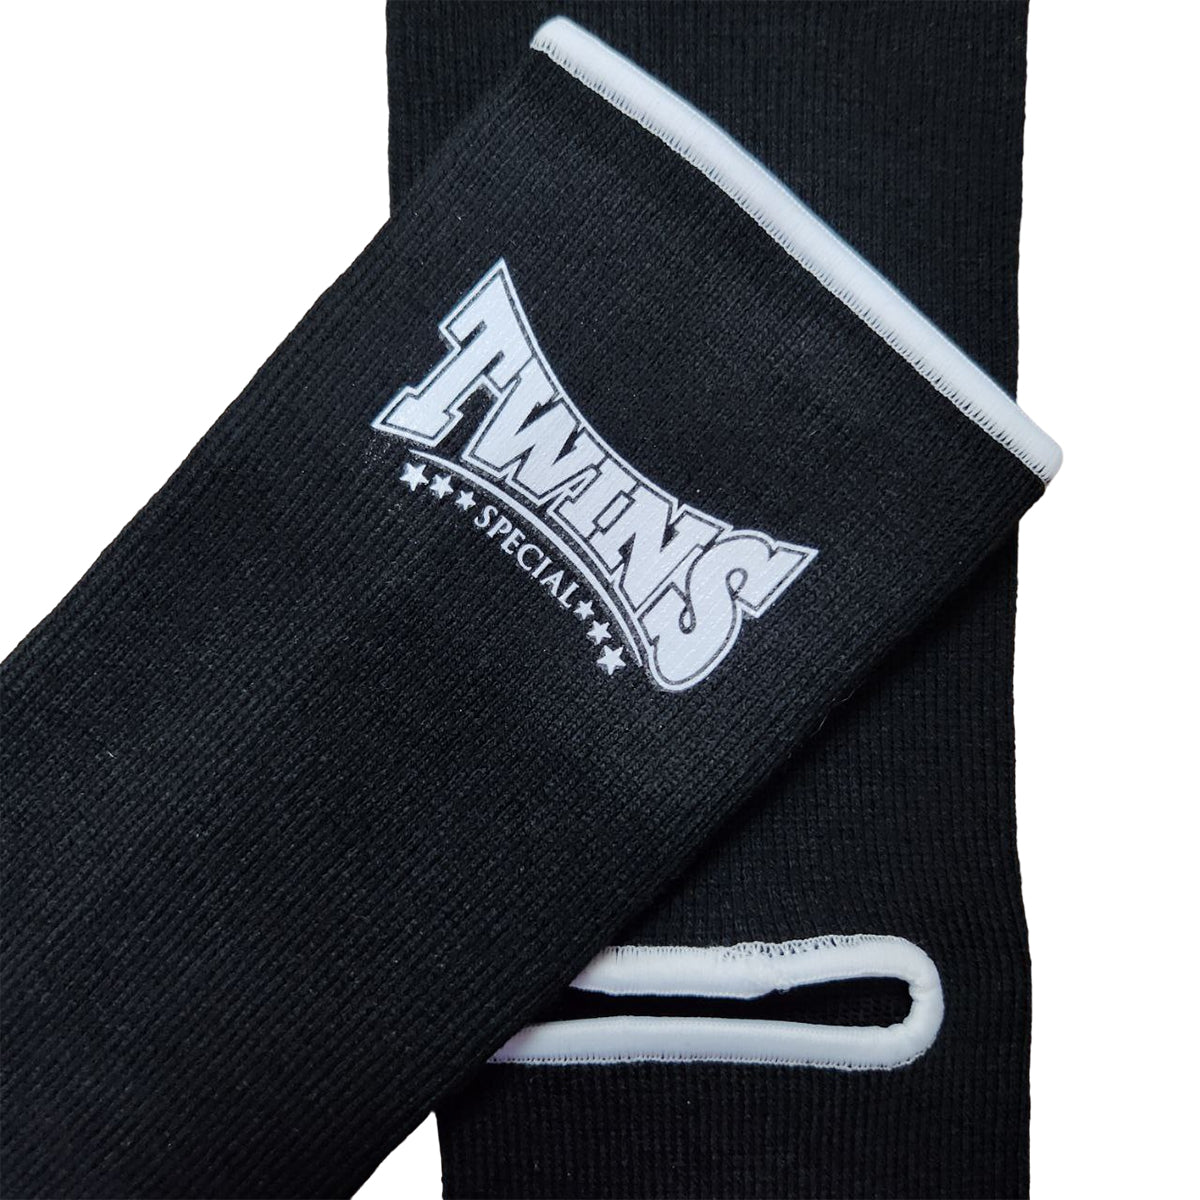 Ankle Support Twins Special AG Black Foot Protection